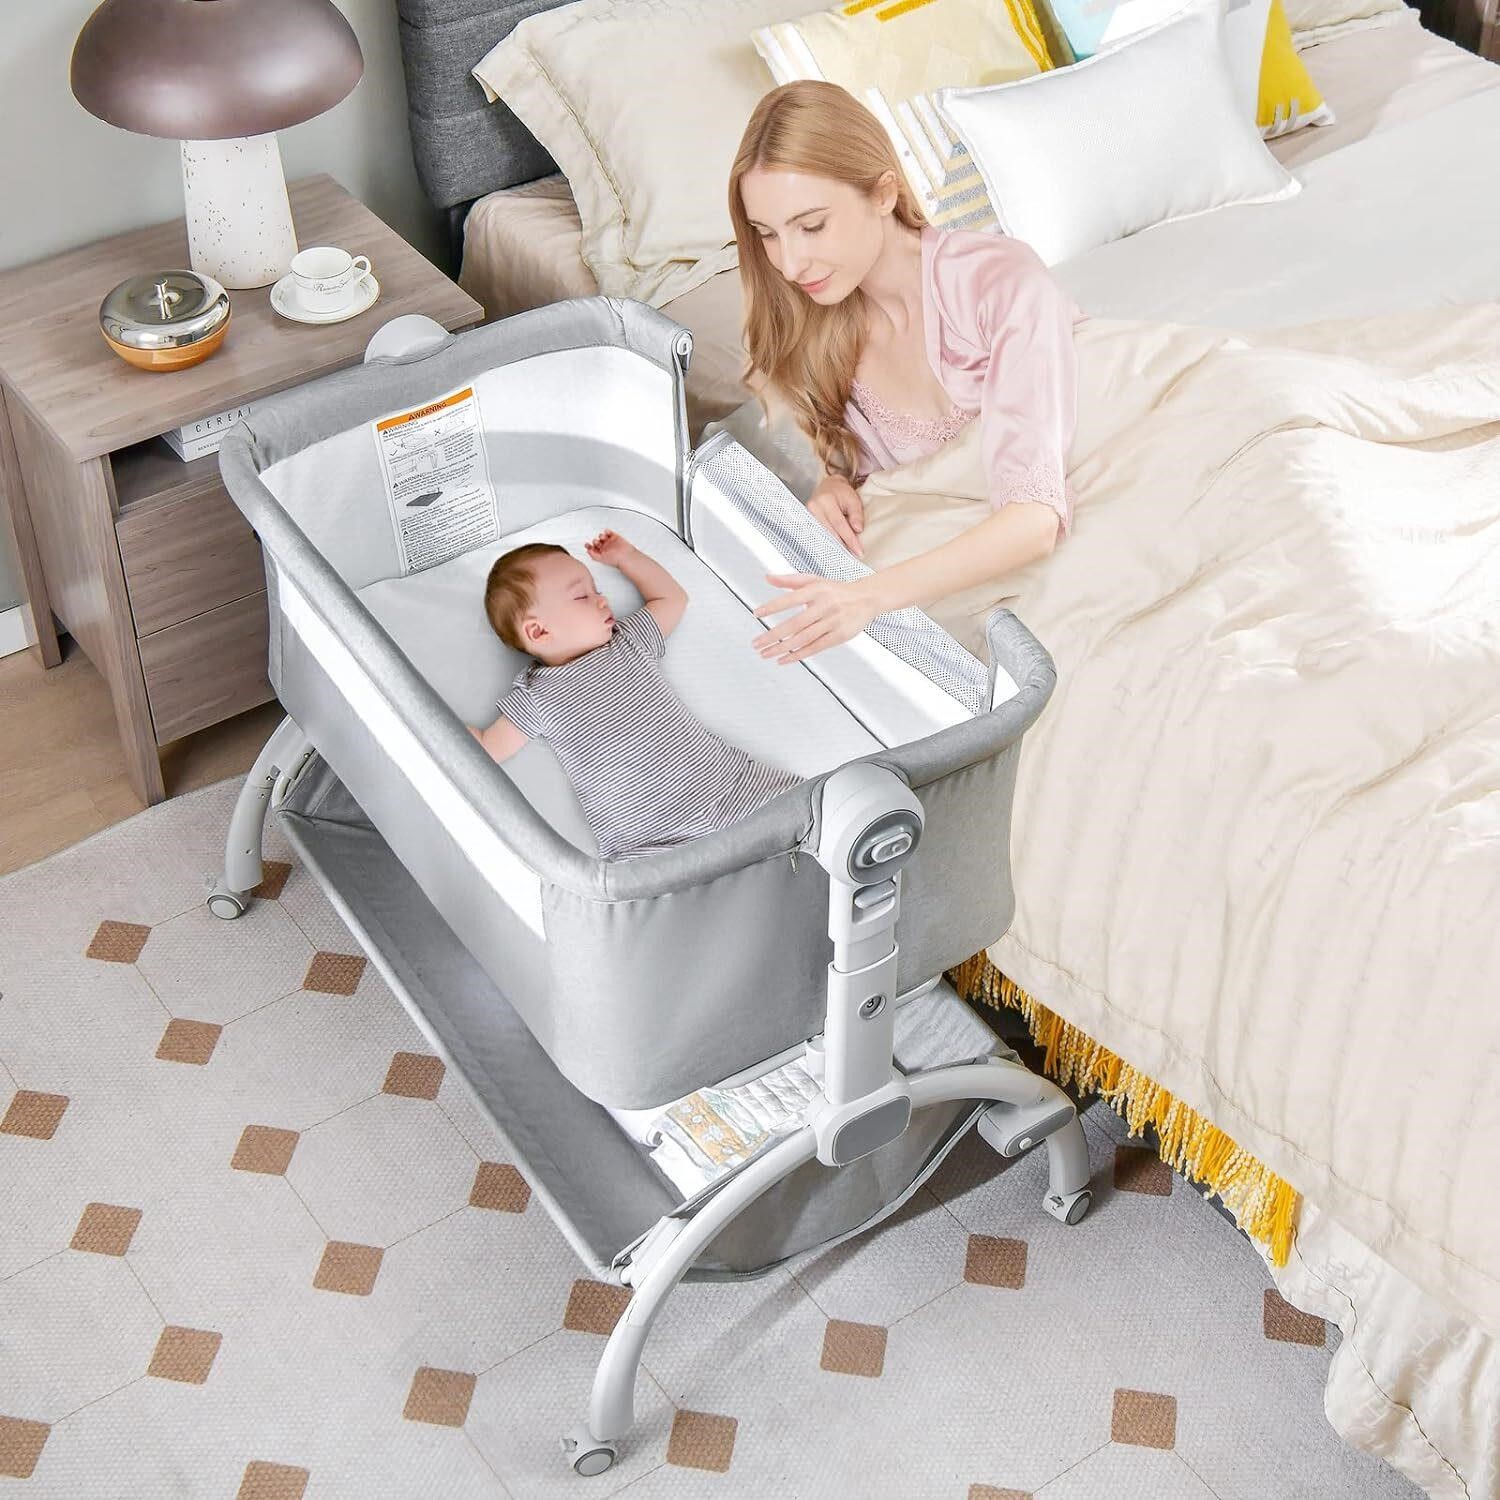 INFANS 3 in 1 Baby Bassinet - Grey 38 x 25